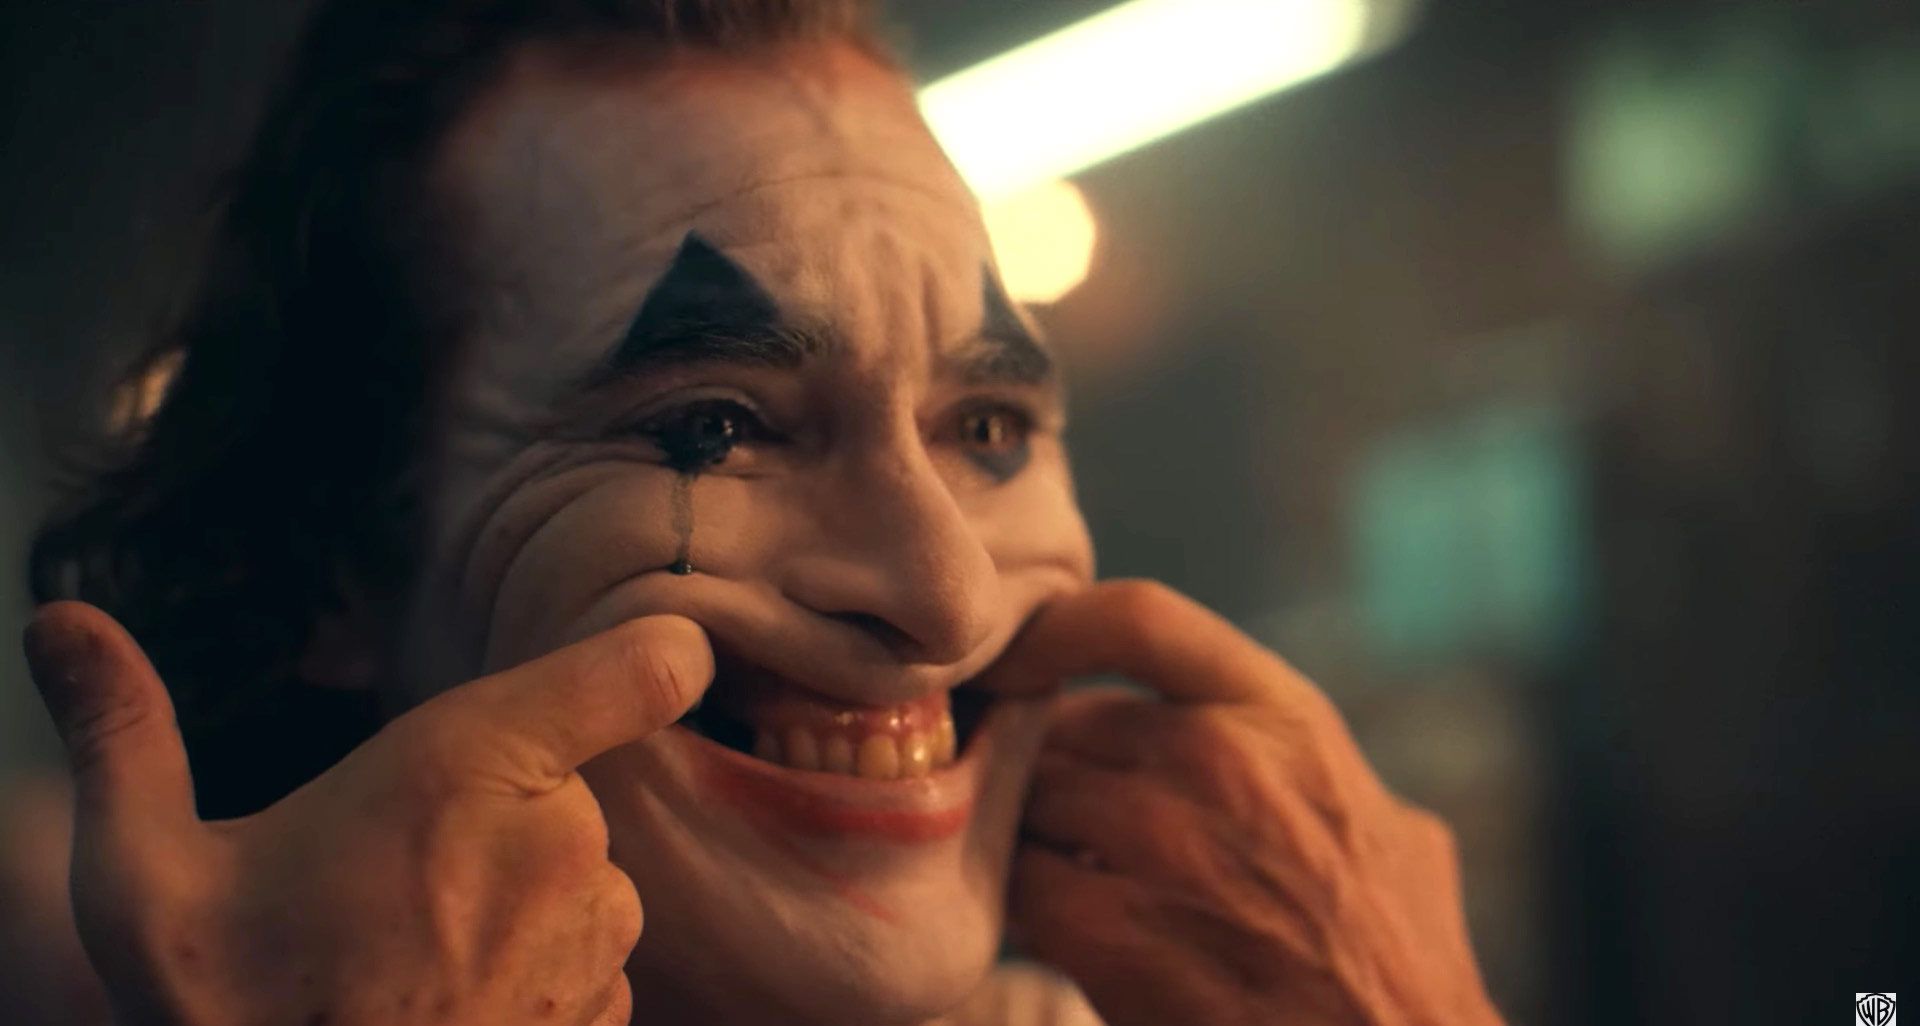 Joker Becomes The Highest Grossing Rated R Film Ever… Duh!